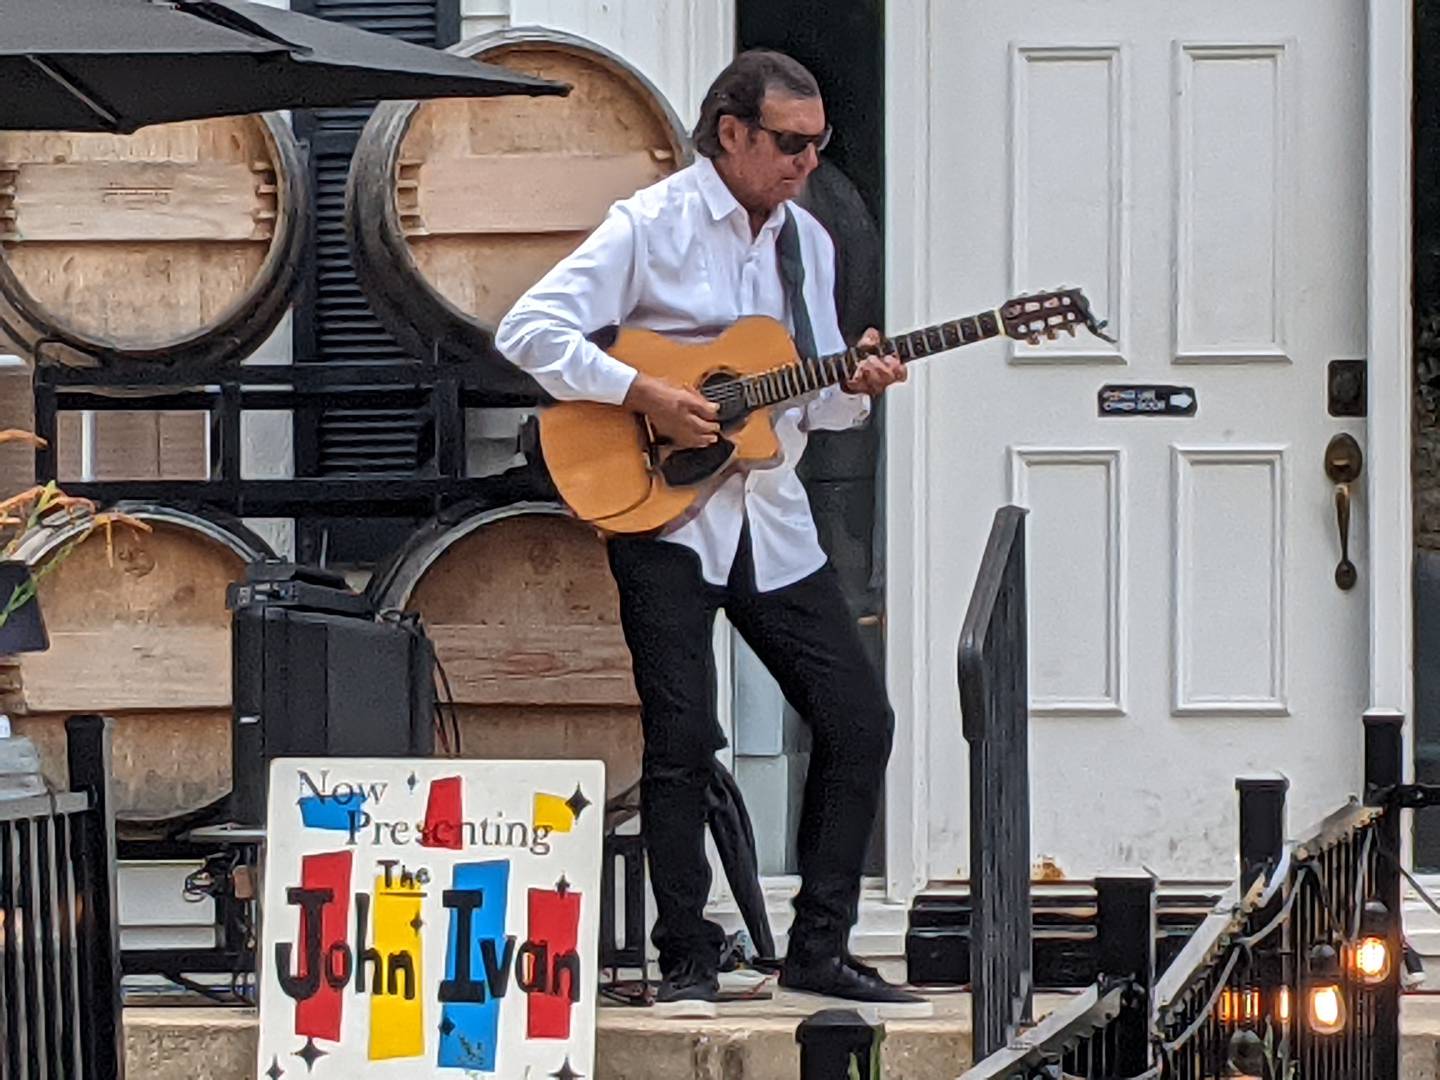 Those attending the Geneva Arts Fair on Sunday also got the opportunity to hear guitarist John Ivan of Batavia, who was playing at the Geneva Winery along Third Street.